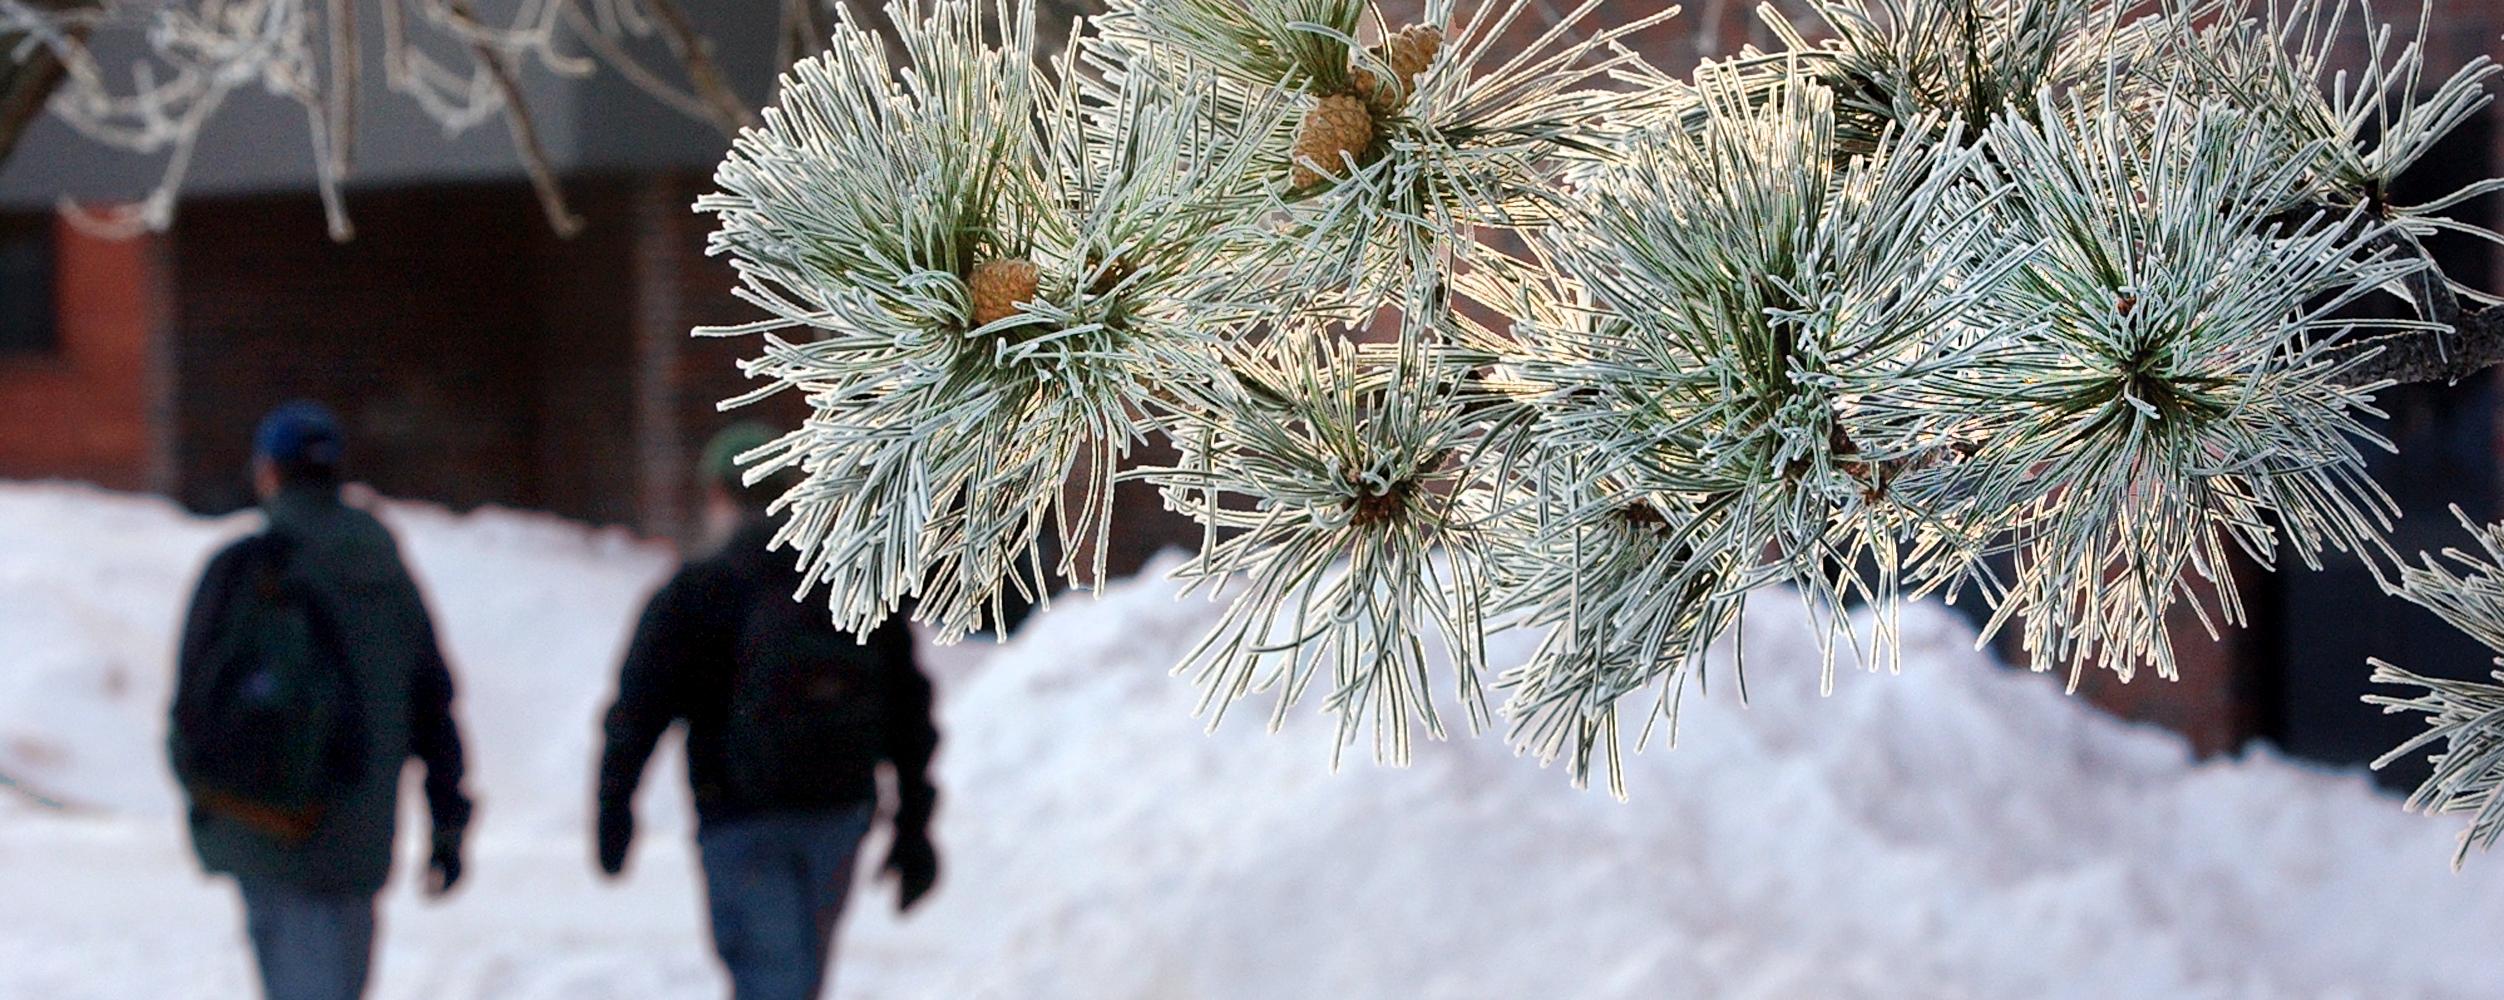 winter pine tree with students in background